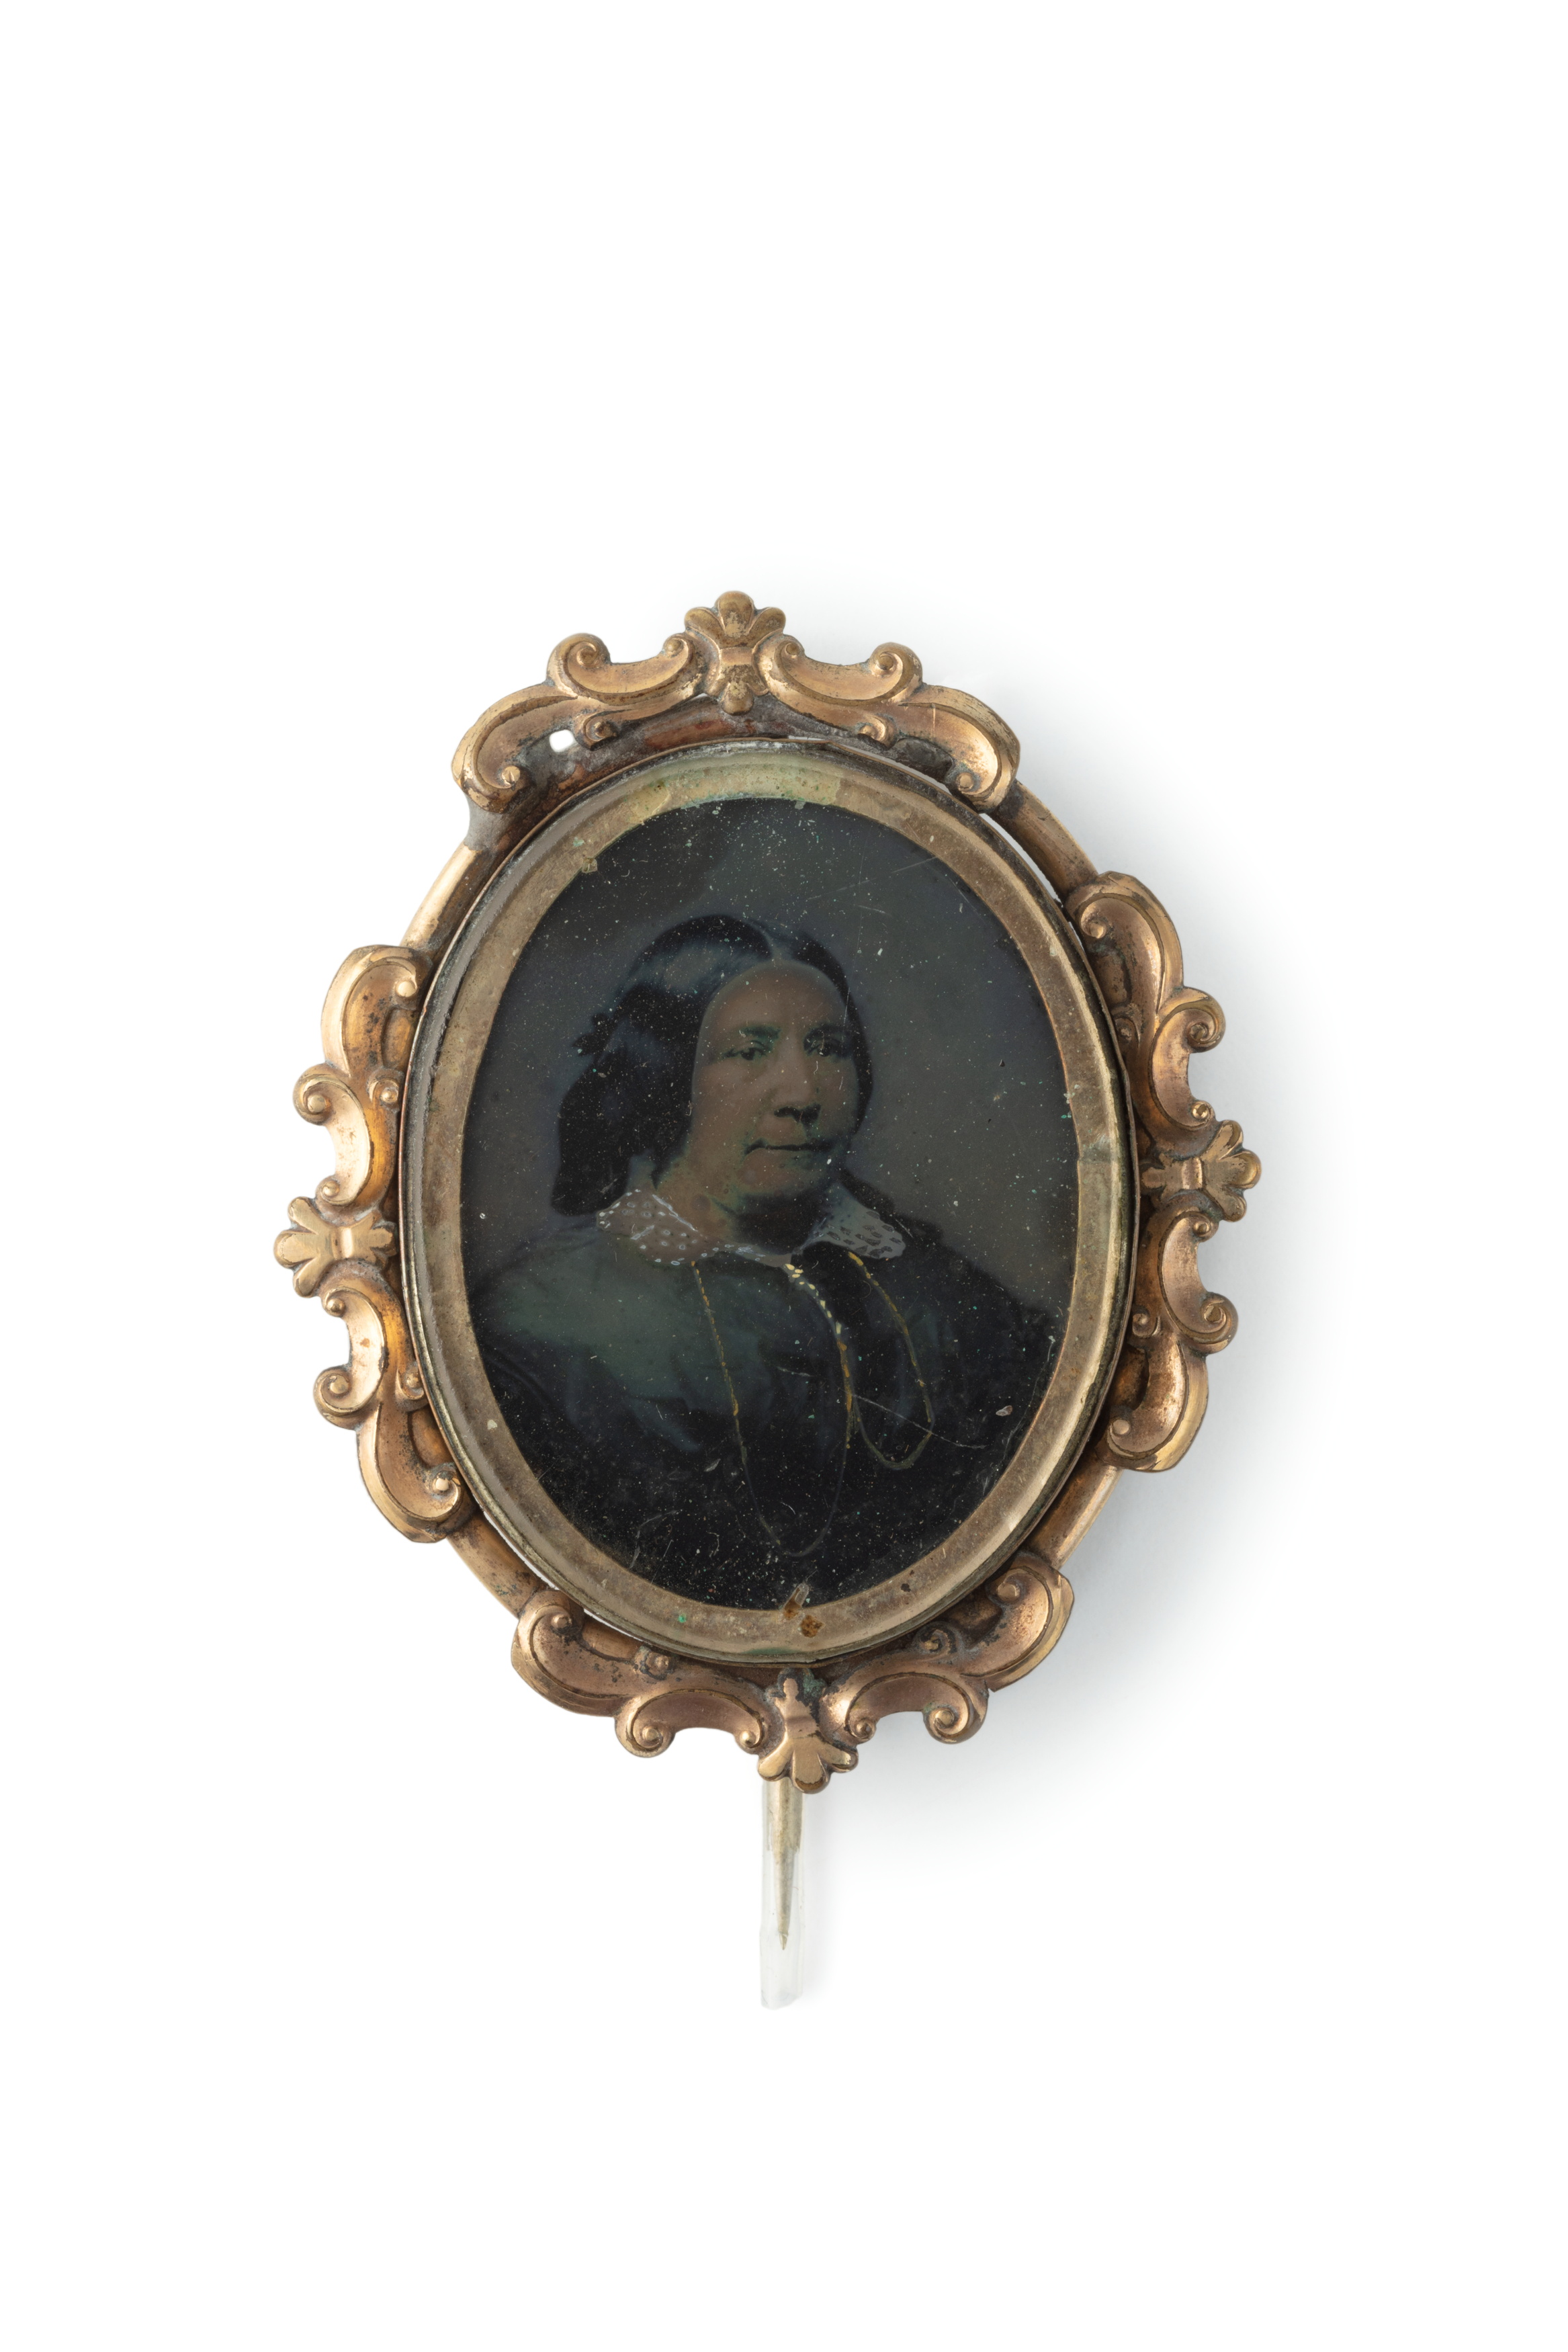 Brooch containing ambrotype studio portrait of a woman